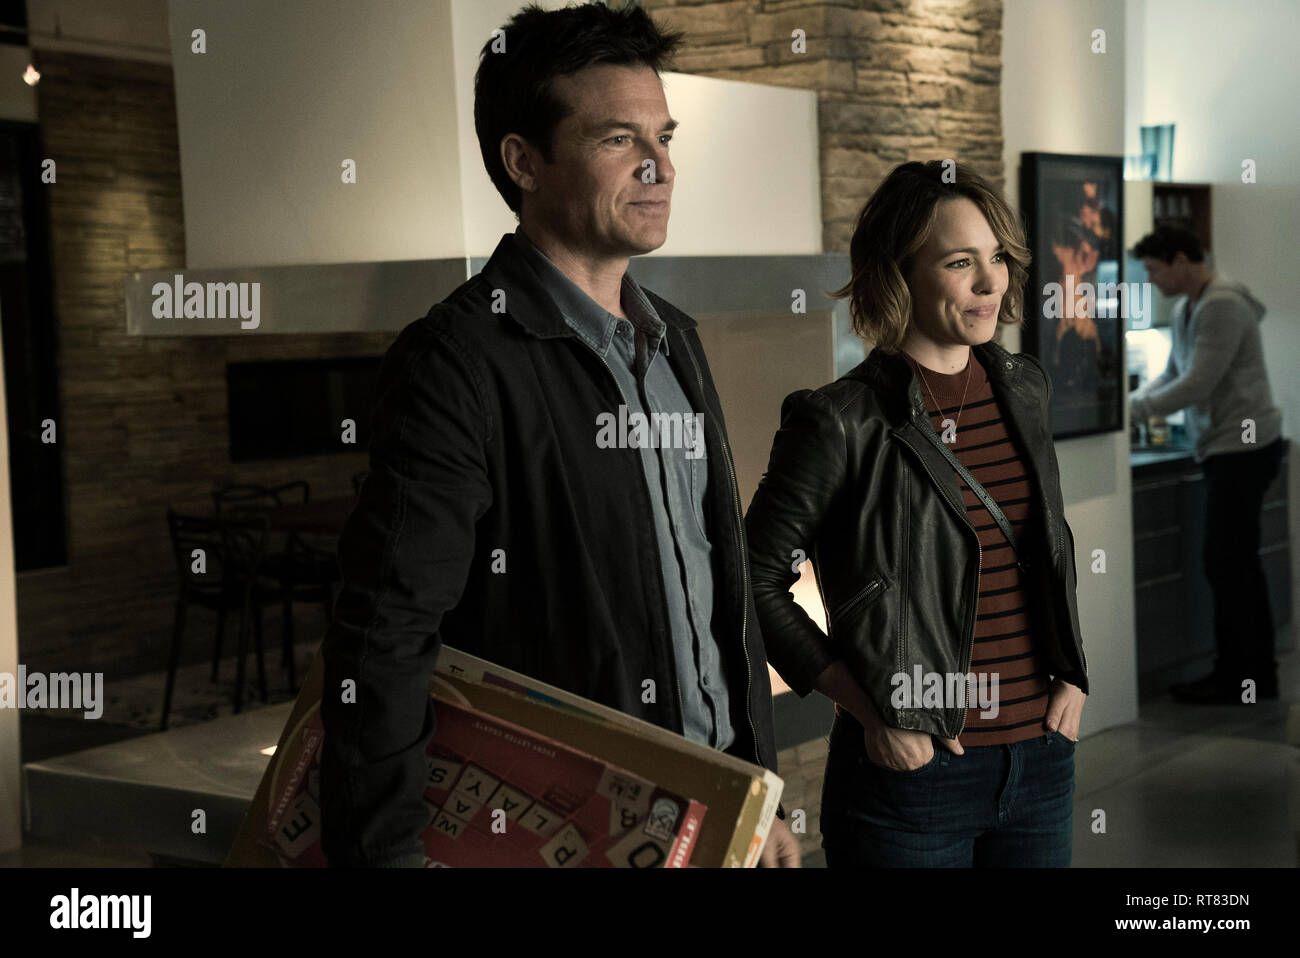 RELEASE DATE: February 23, 2018 TITLE: Game Night STUDIO: New Line Cinema DIRECTOR: John Francis Daley, Jonathan Goldstein PLOT: A group of friends who meet regularly for game nights find themselves entangled in a real-life mystery when the shady brother of one of them is seemingly kidnapped by dangerous gangsters. STARRING: Jason Bateman, Rachel McAdams, Kyle Chandler. (Credit Image: © New Line Cinema/Entertainment Pictures) Stock Photo